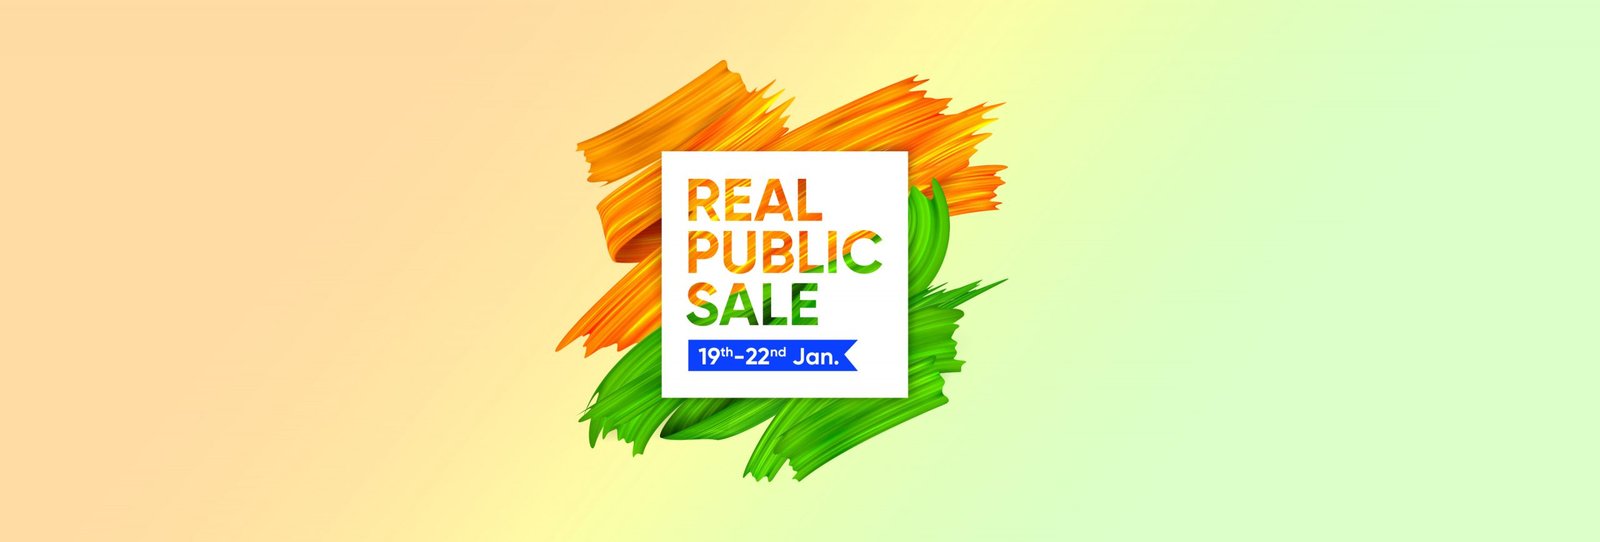 ‘Realpublic Sale’ on Flipkart and realme.com for this Republic Day scaled